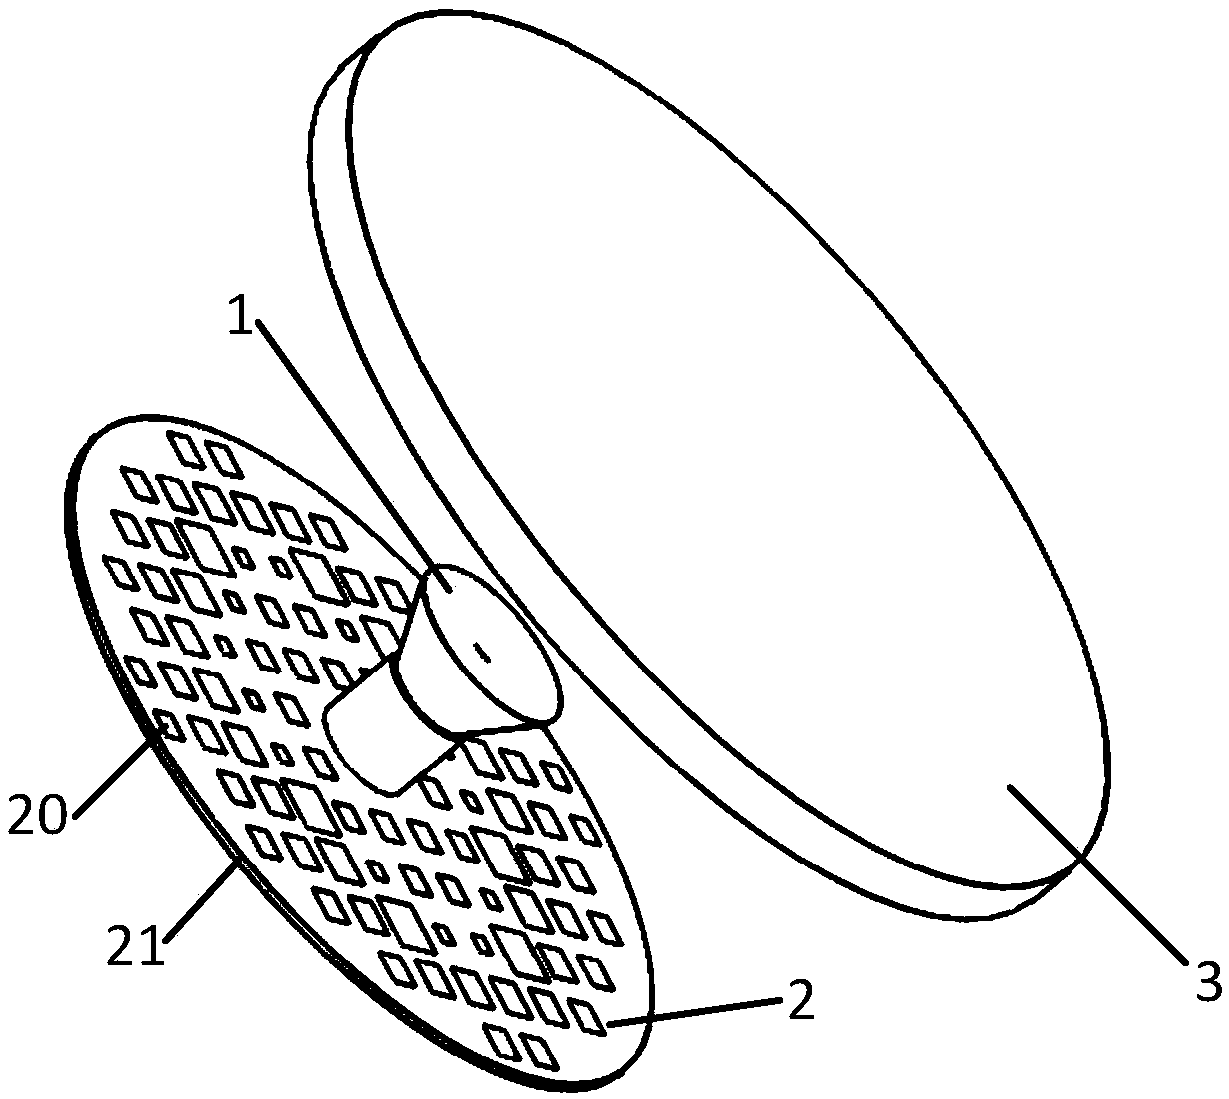 A Low Profile Lens Antenna Based on Reflectarray Feed